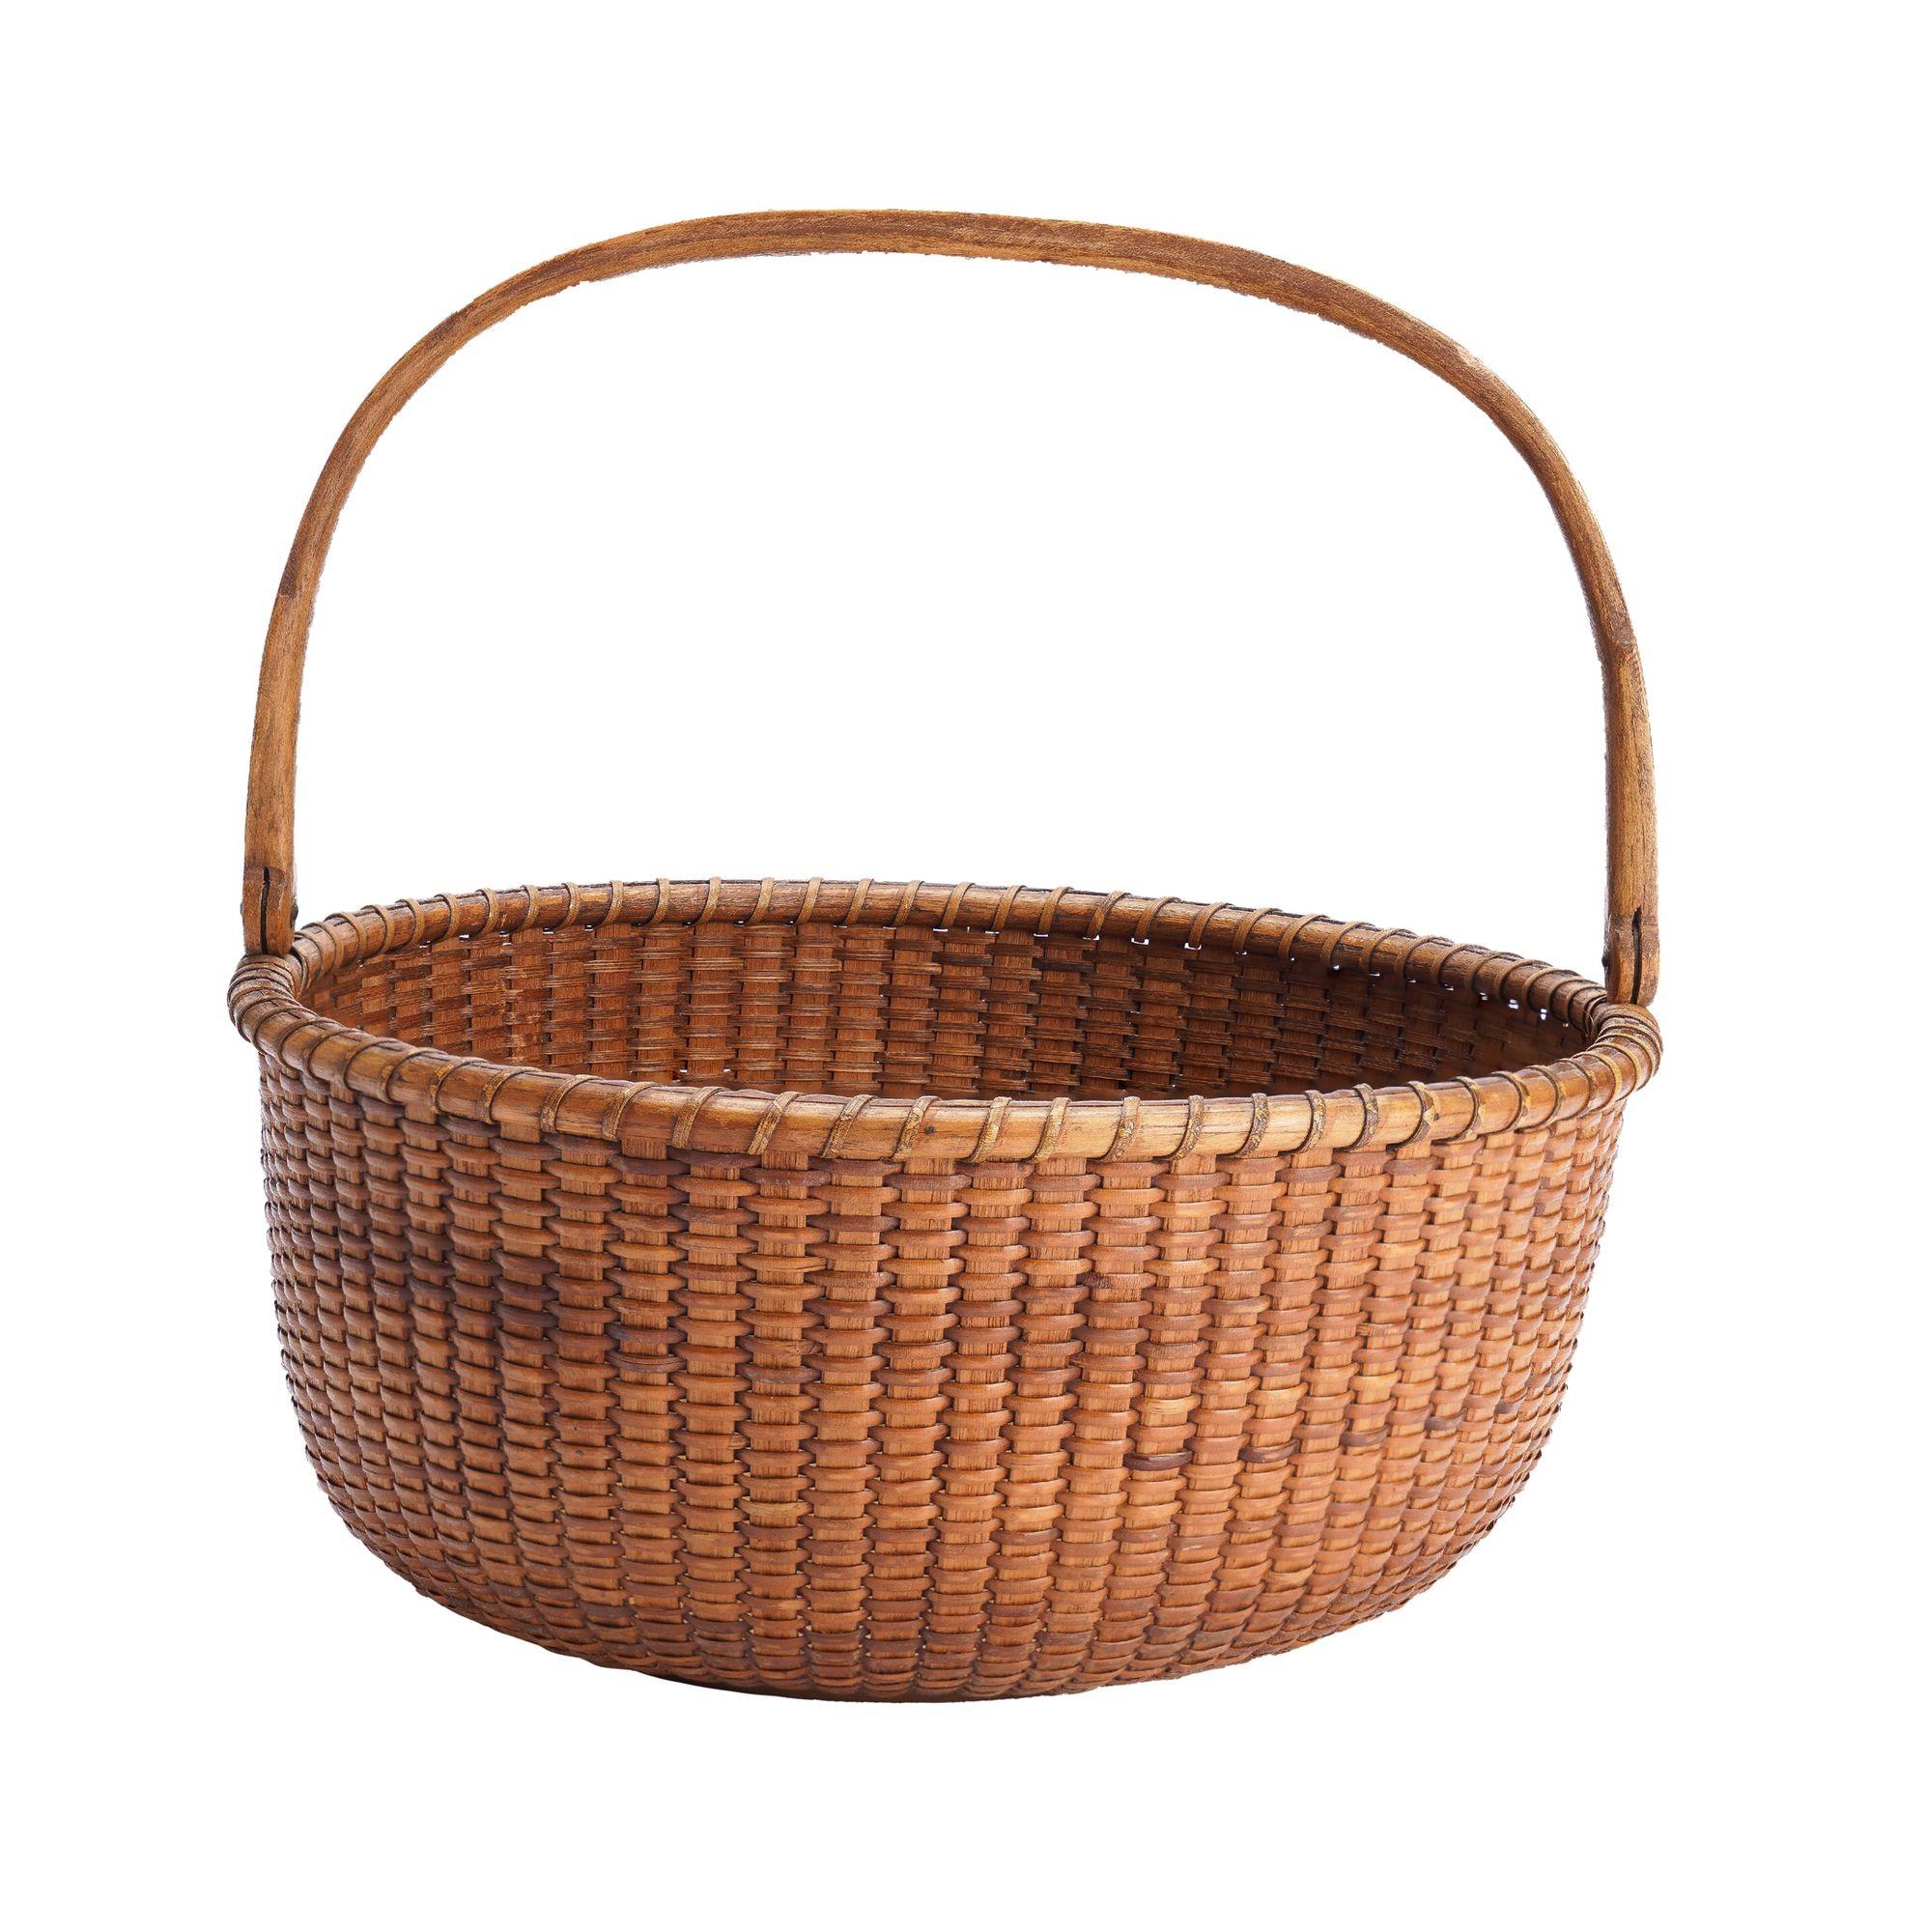 Round, open top Nantucket lighthouse basket in woven bamboo with oak stays, a slender carved oak handle with lollipop ends, and a round, hard wood bottom plate with two concentric scribed circles. The partial label on the under side of the basket